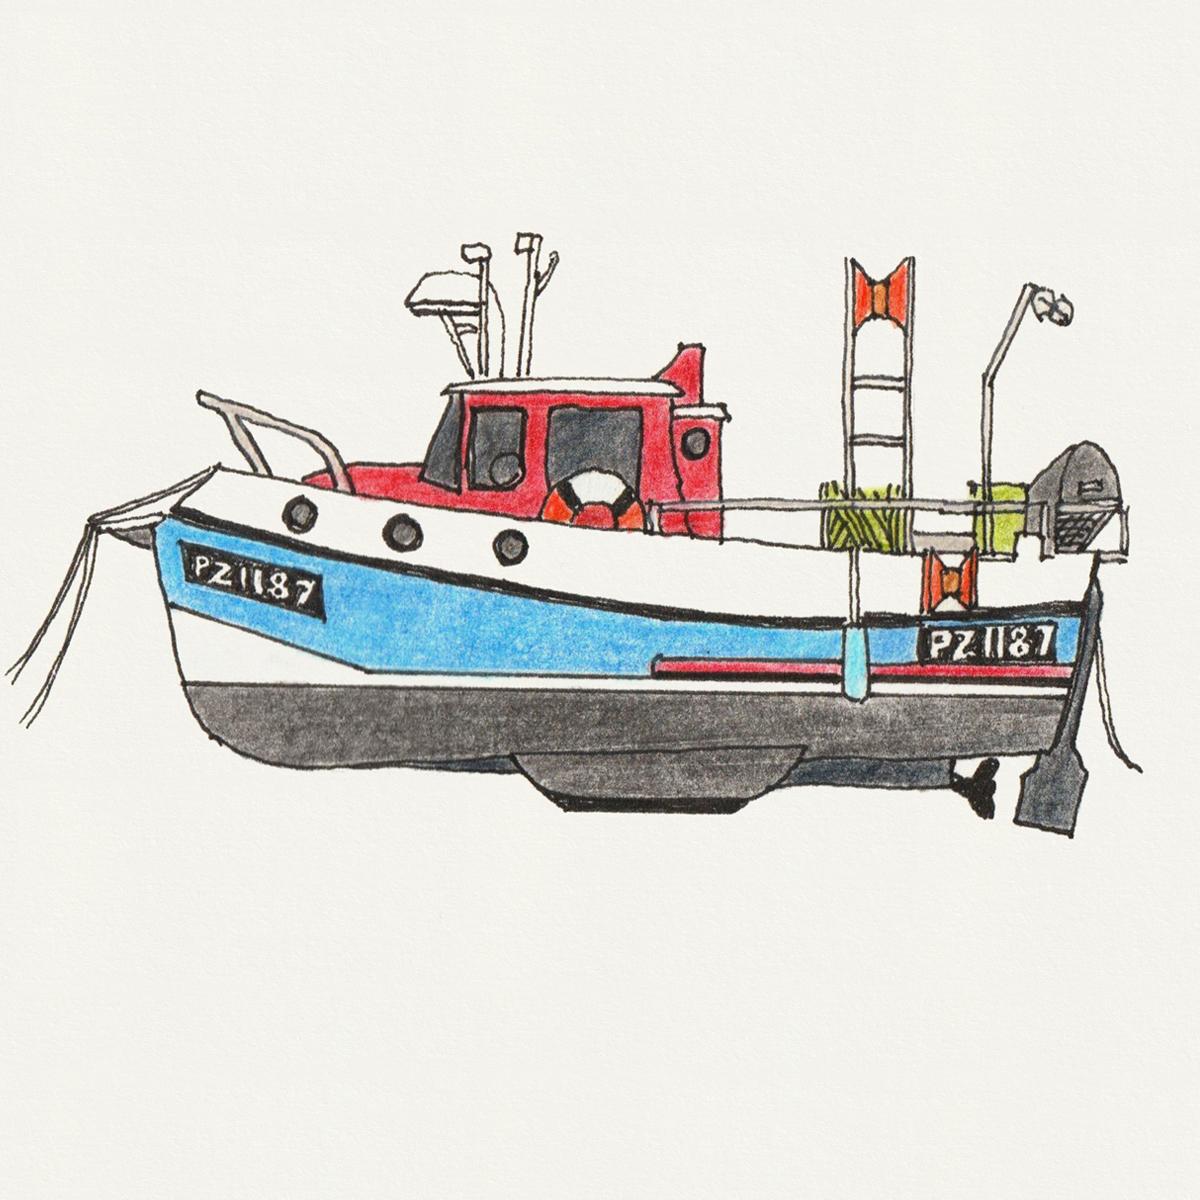 Limited edition print from pen and ink drawing of a fishing boat